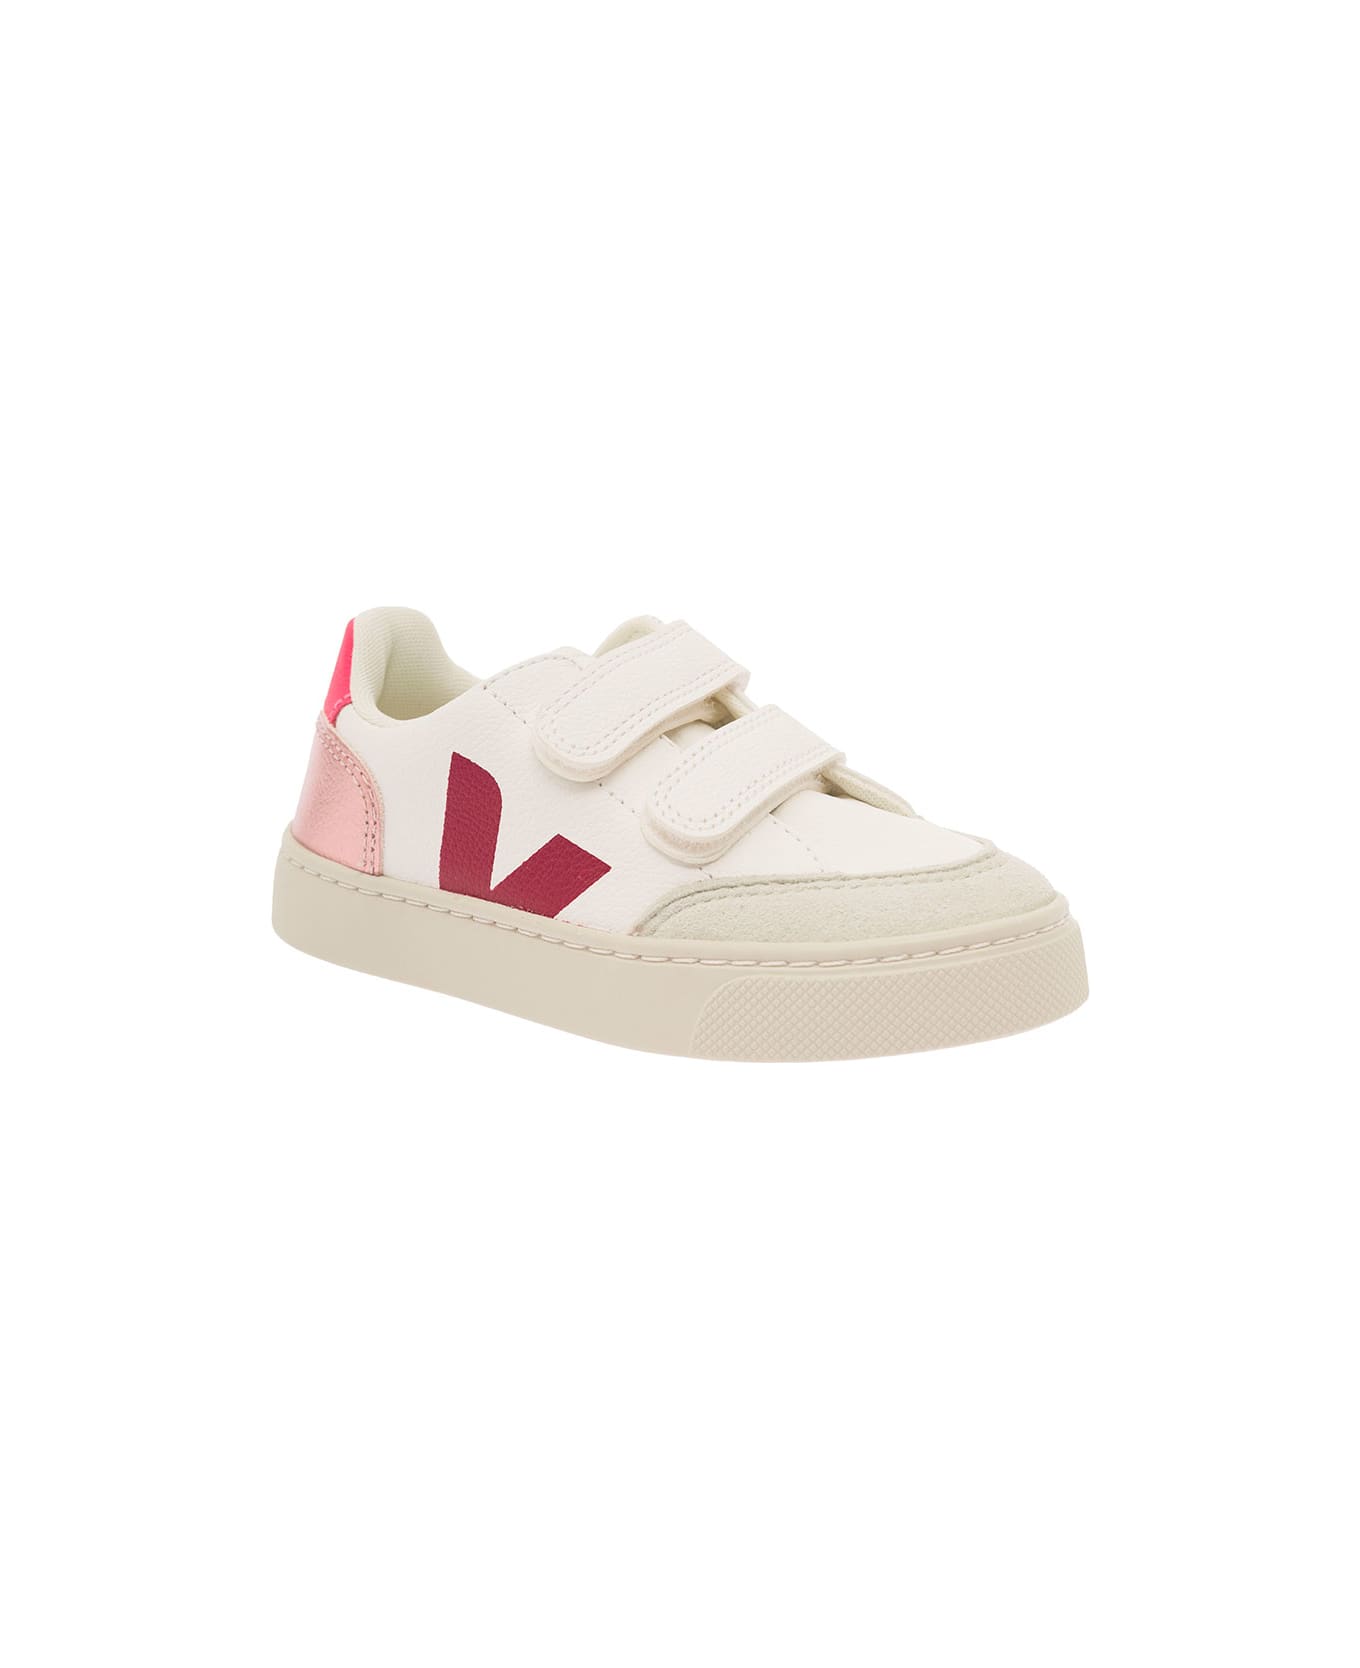 Veja White Sneaker With Fuchsia Logo And Heel Tab In Leather Girl - Multicolor